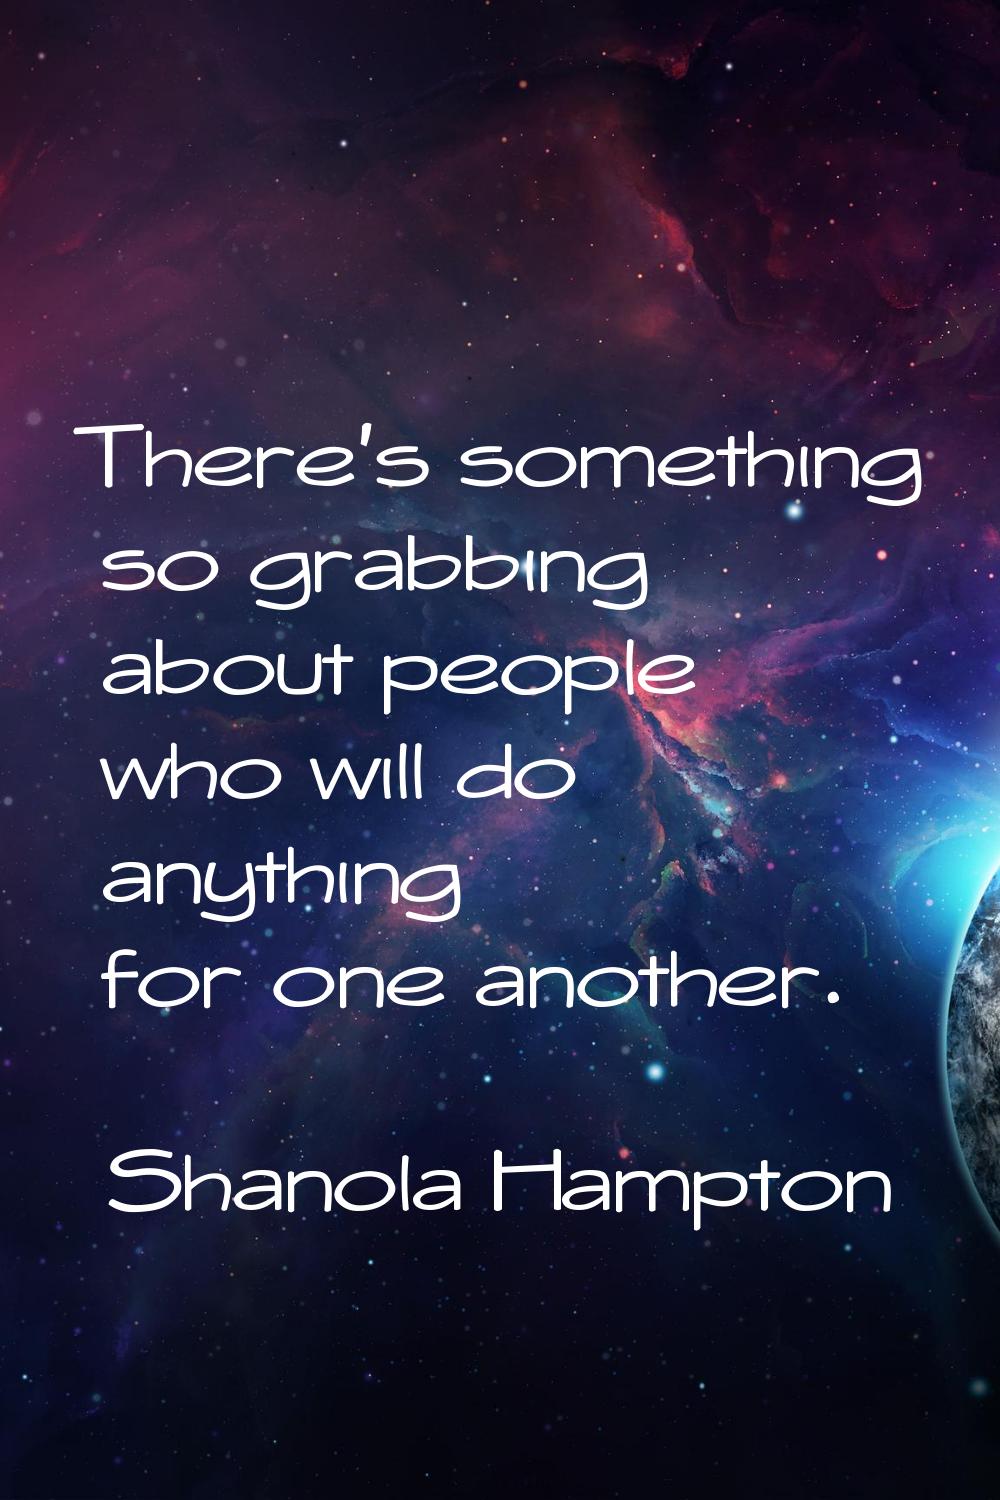 There's something so grabbing about people who will do anything for one another.